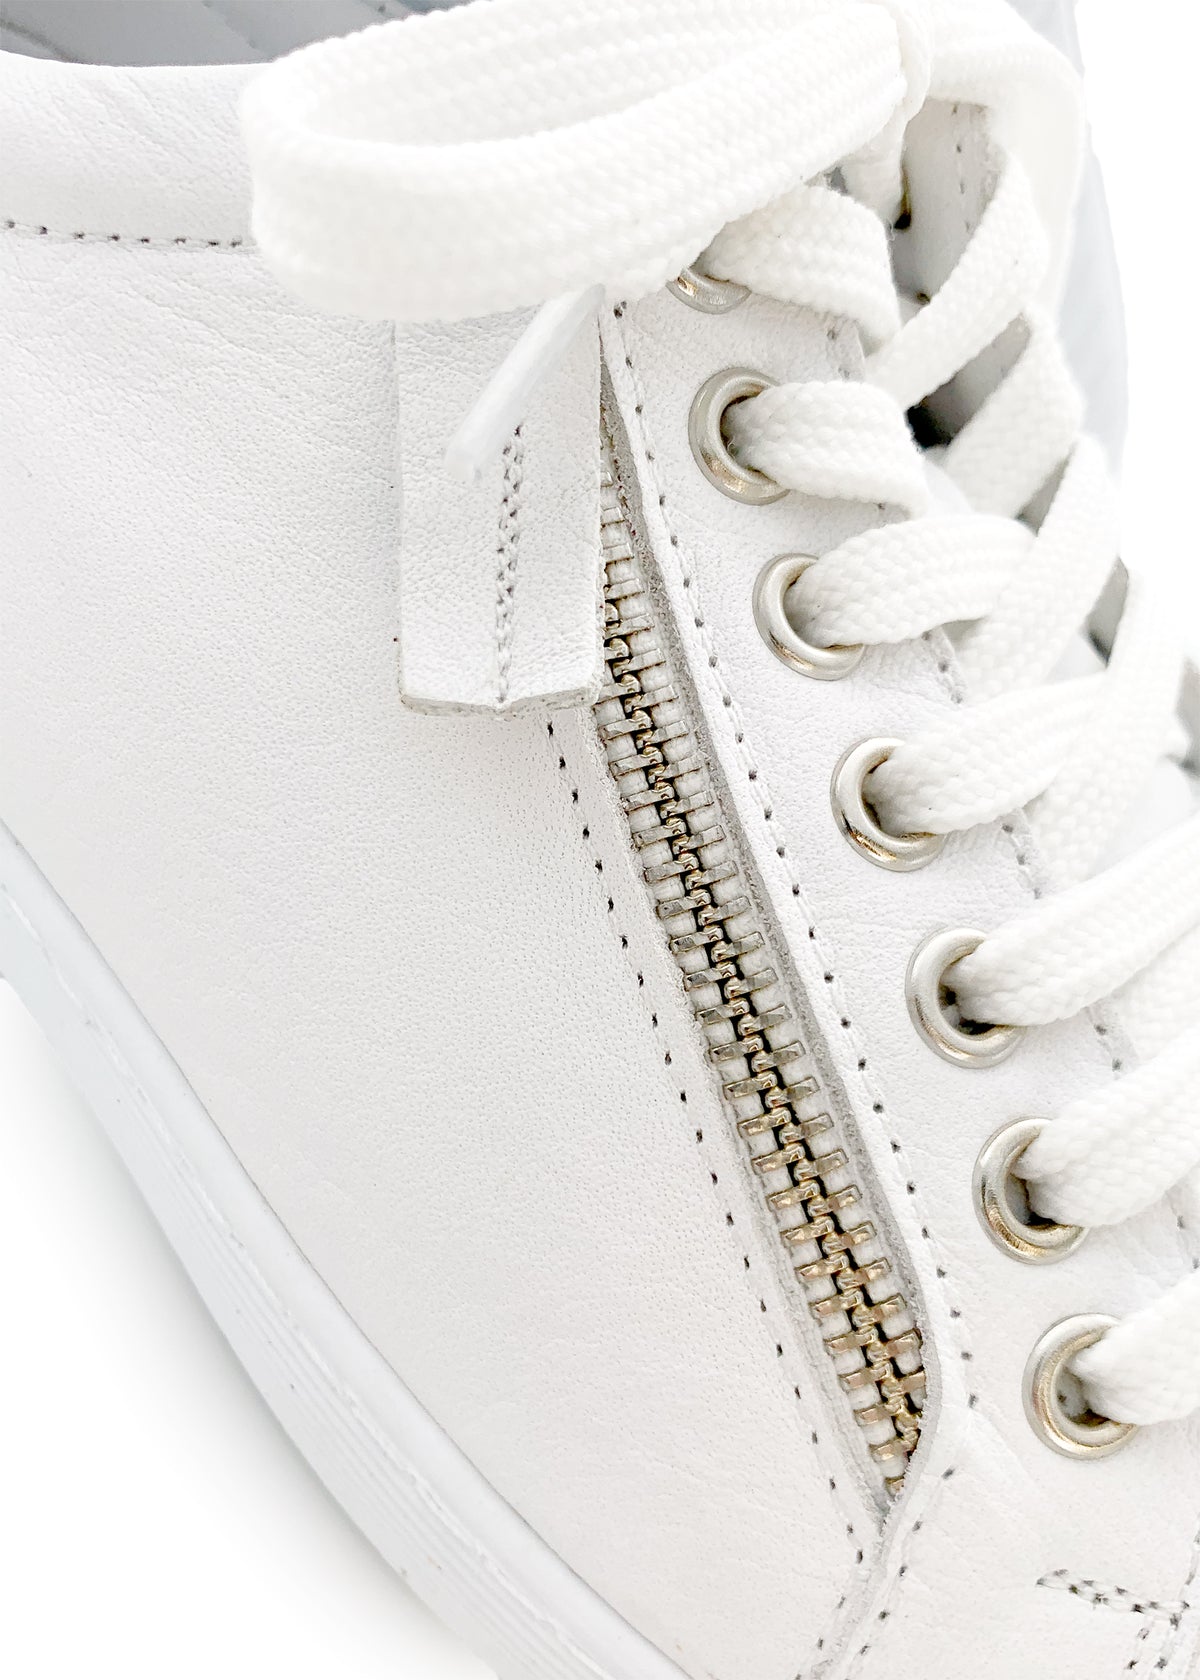 Low-top sneakers - white leather, zipper on the side, wide last